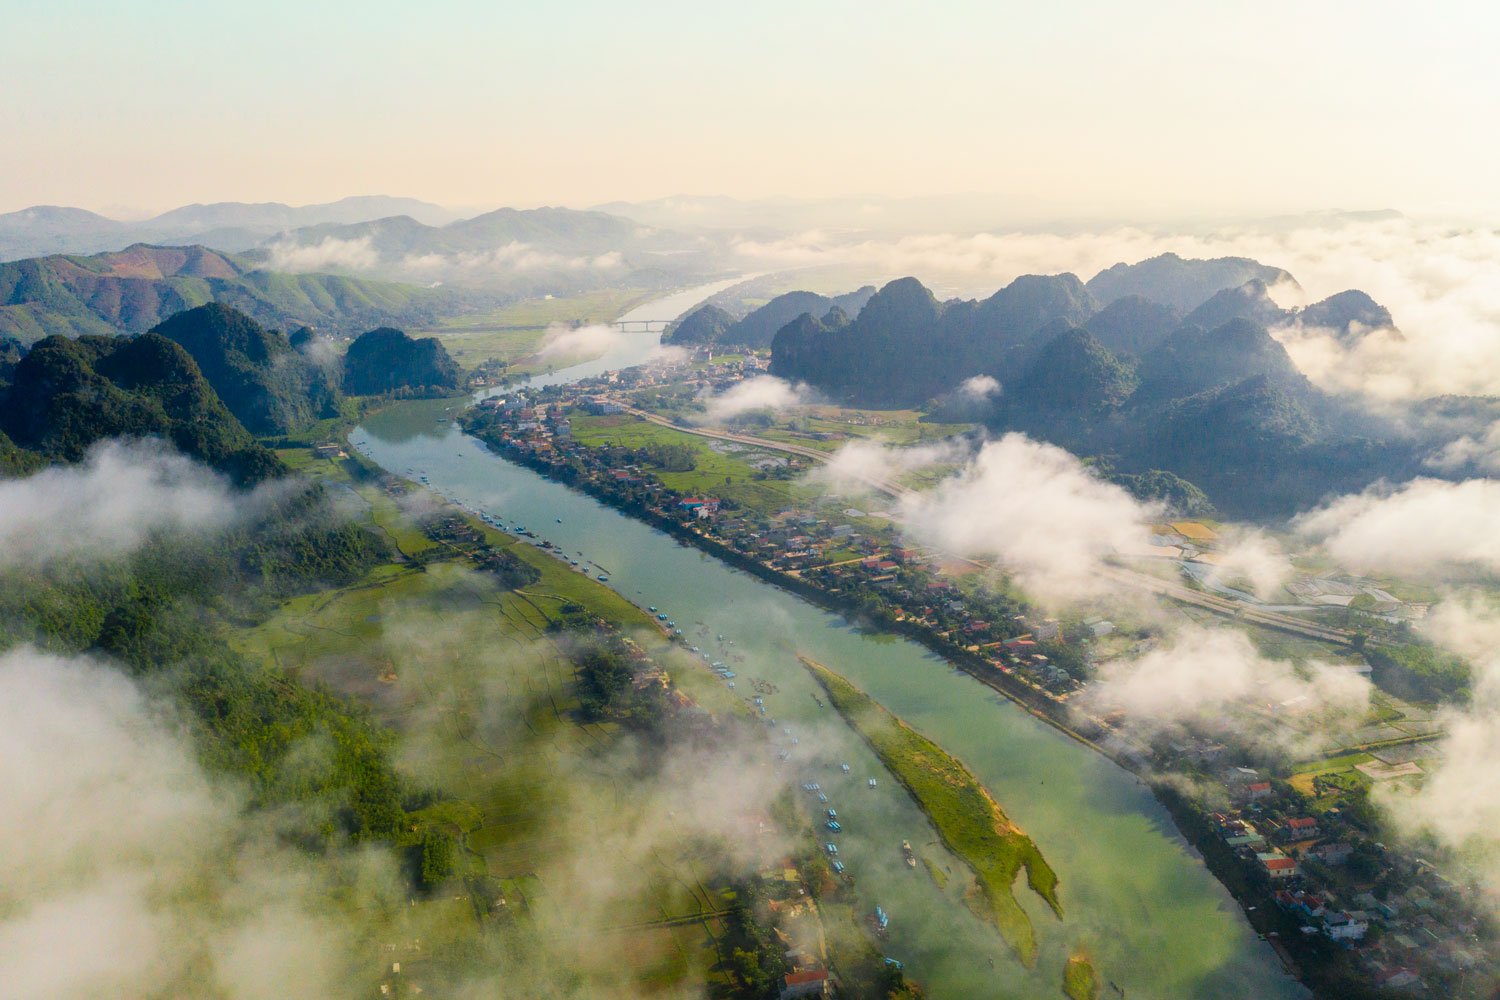 Phong Nha from above. Weather is ideally for an adventure of a lifetime